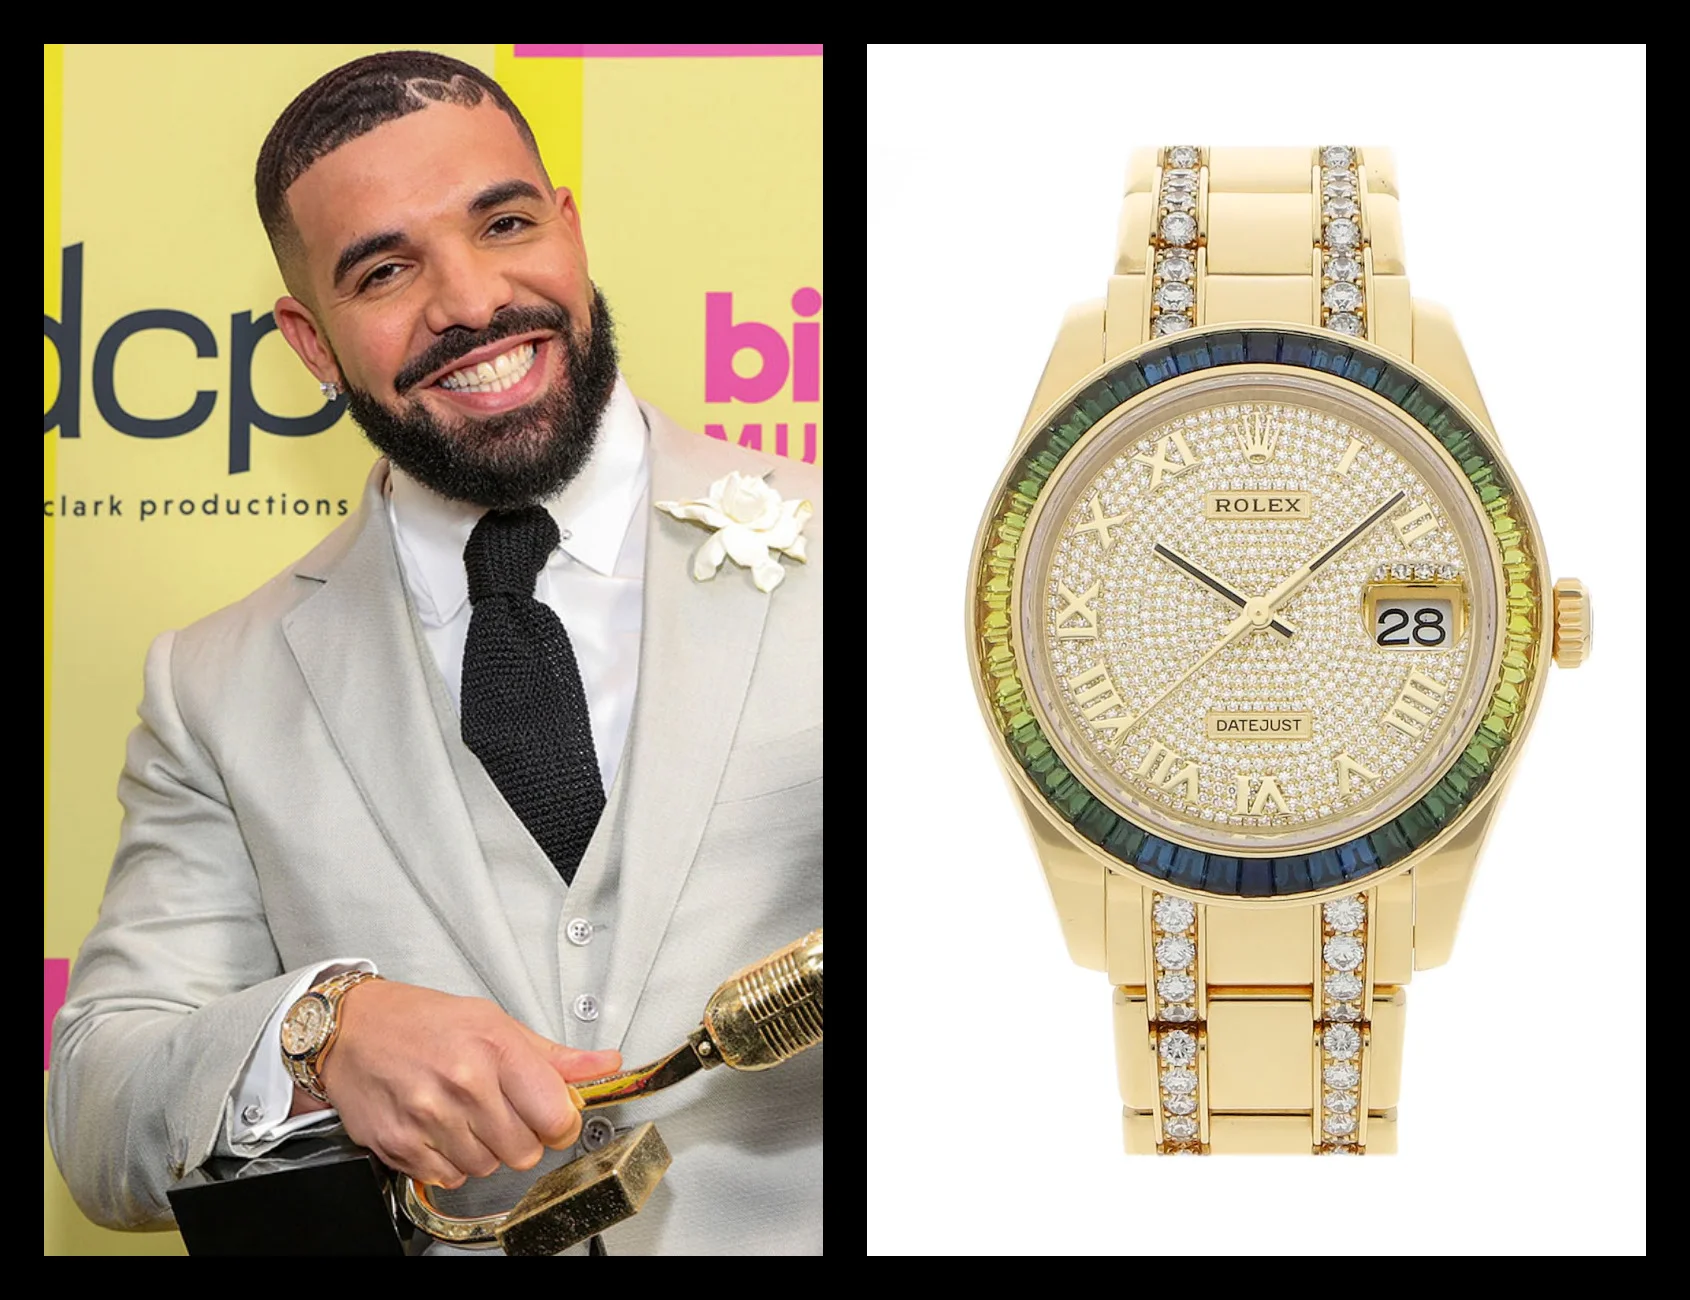 Rich Flex: Drake, 21 Savage - who has the better watch collection?